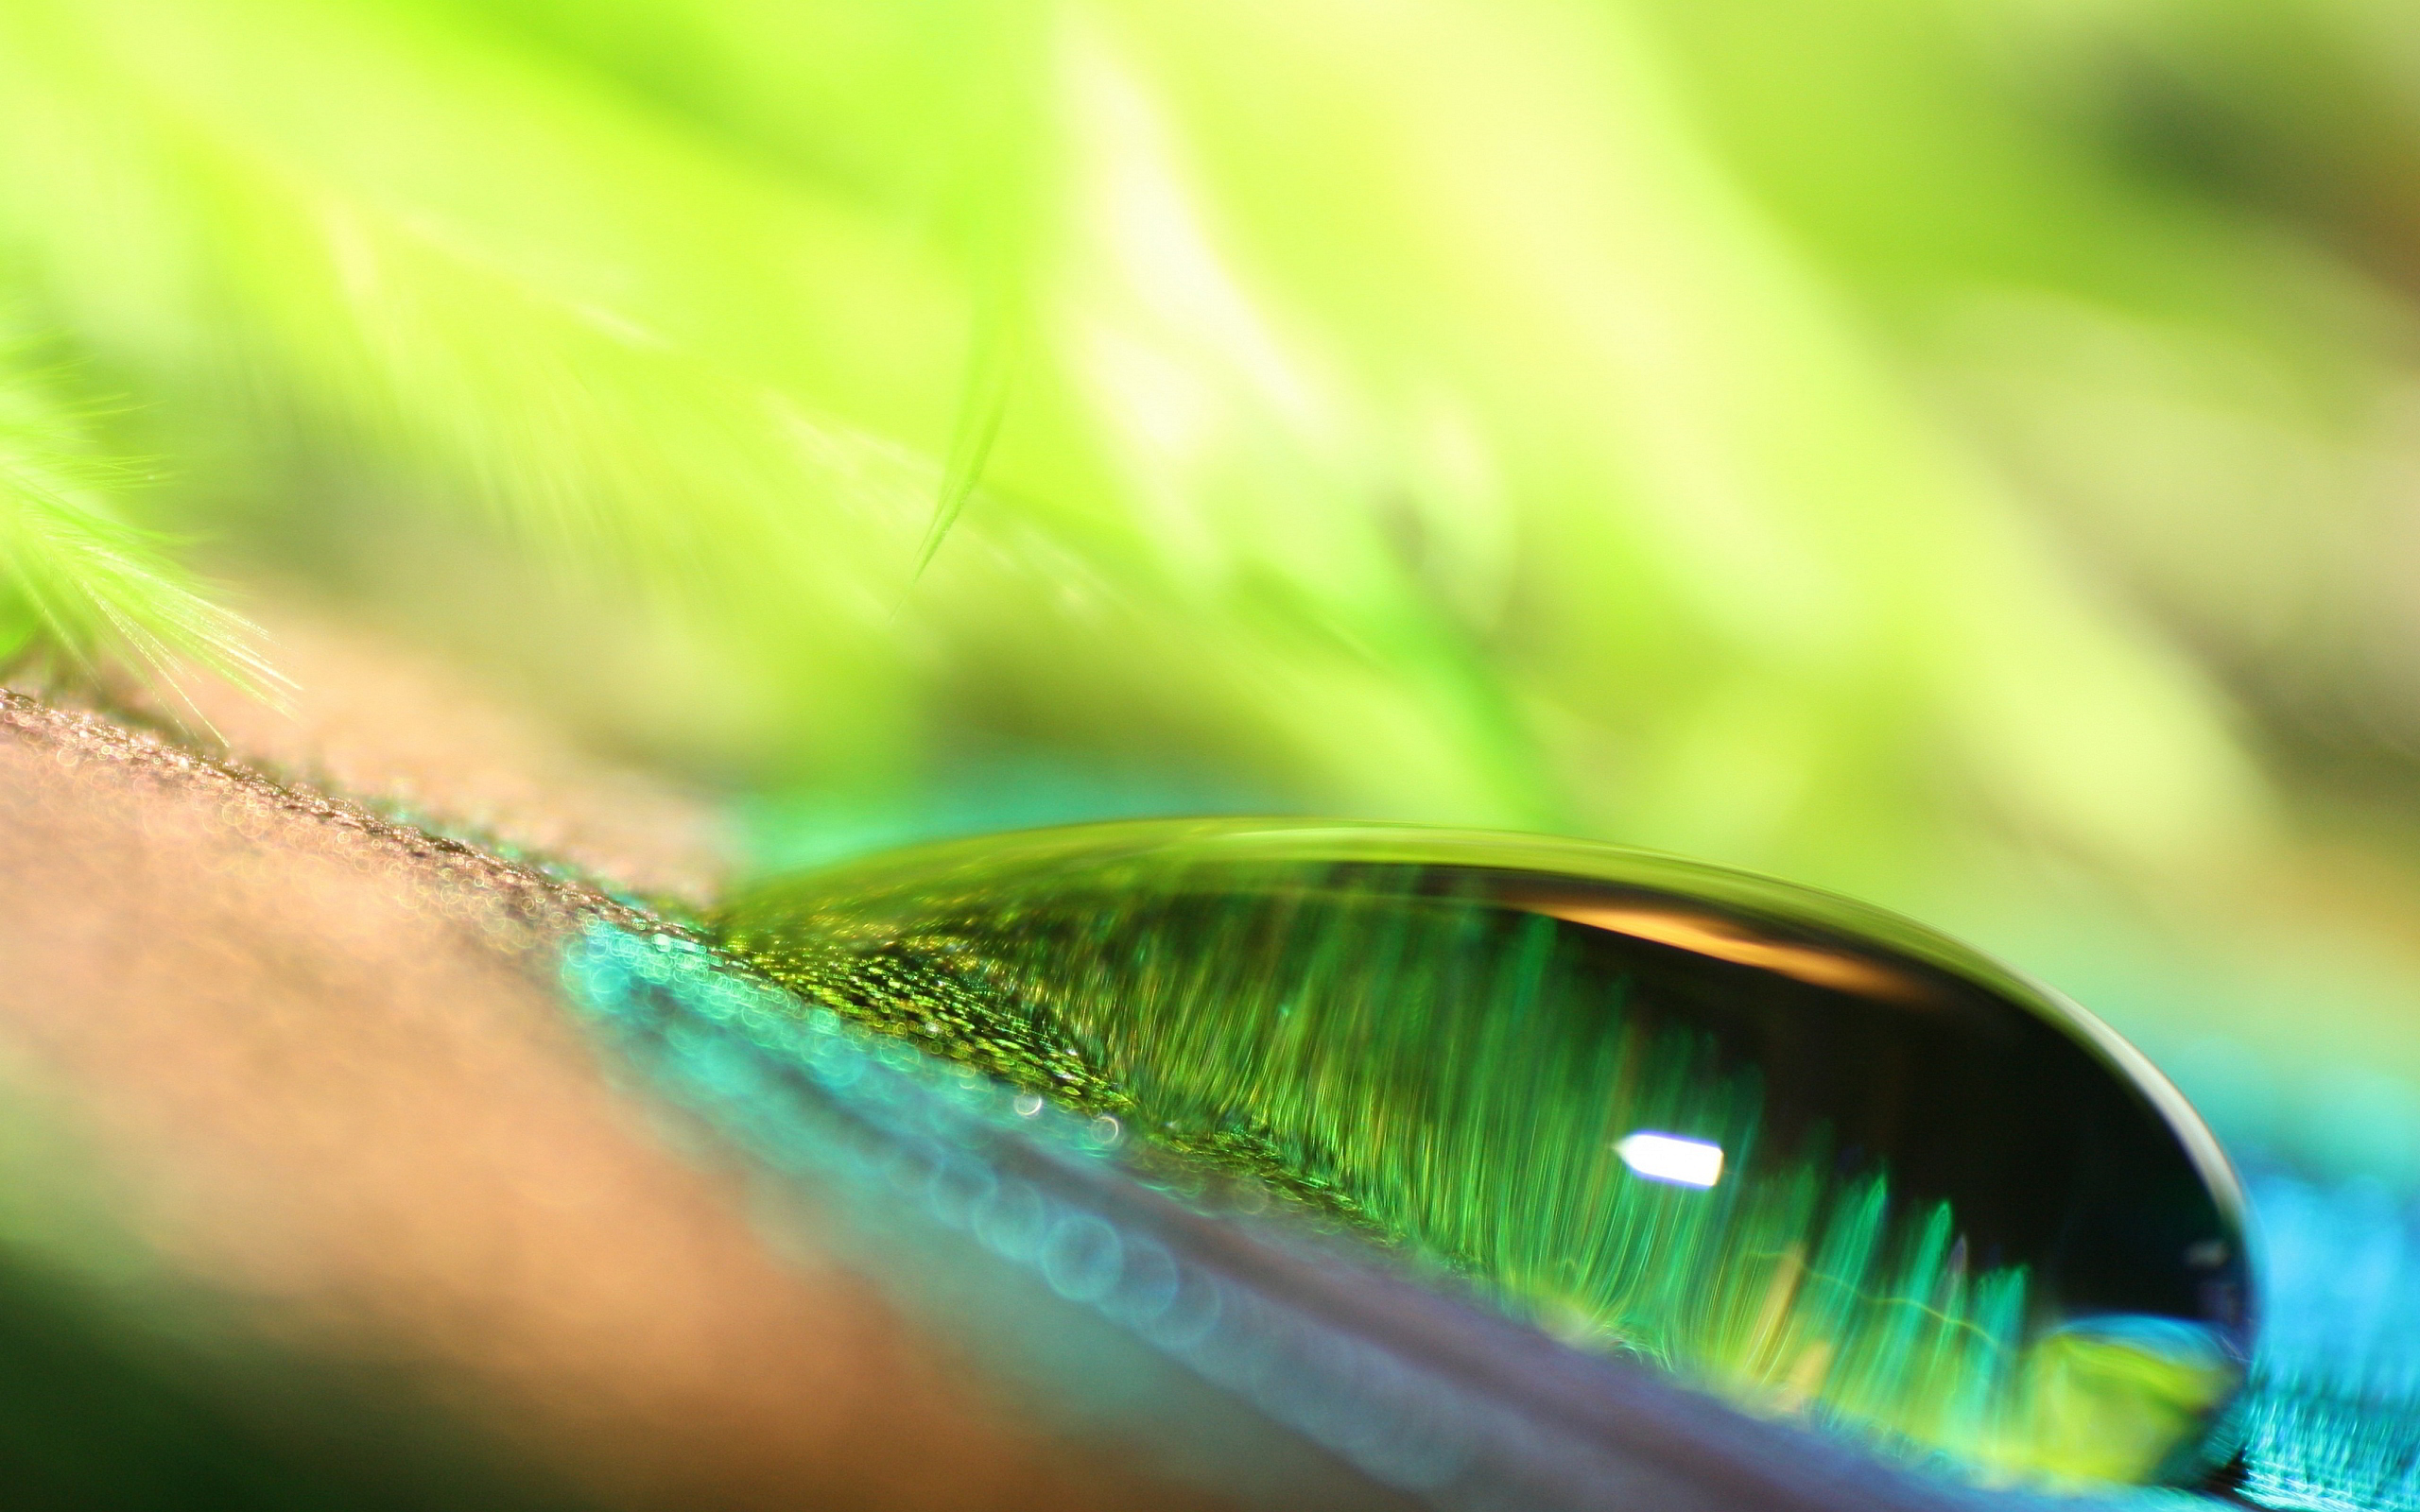 Free photo: Green abstract - Abstract, Bubble, Colors 